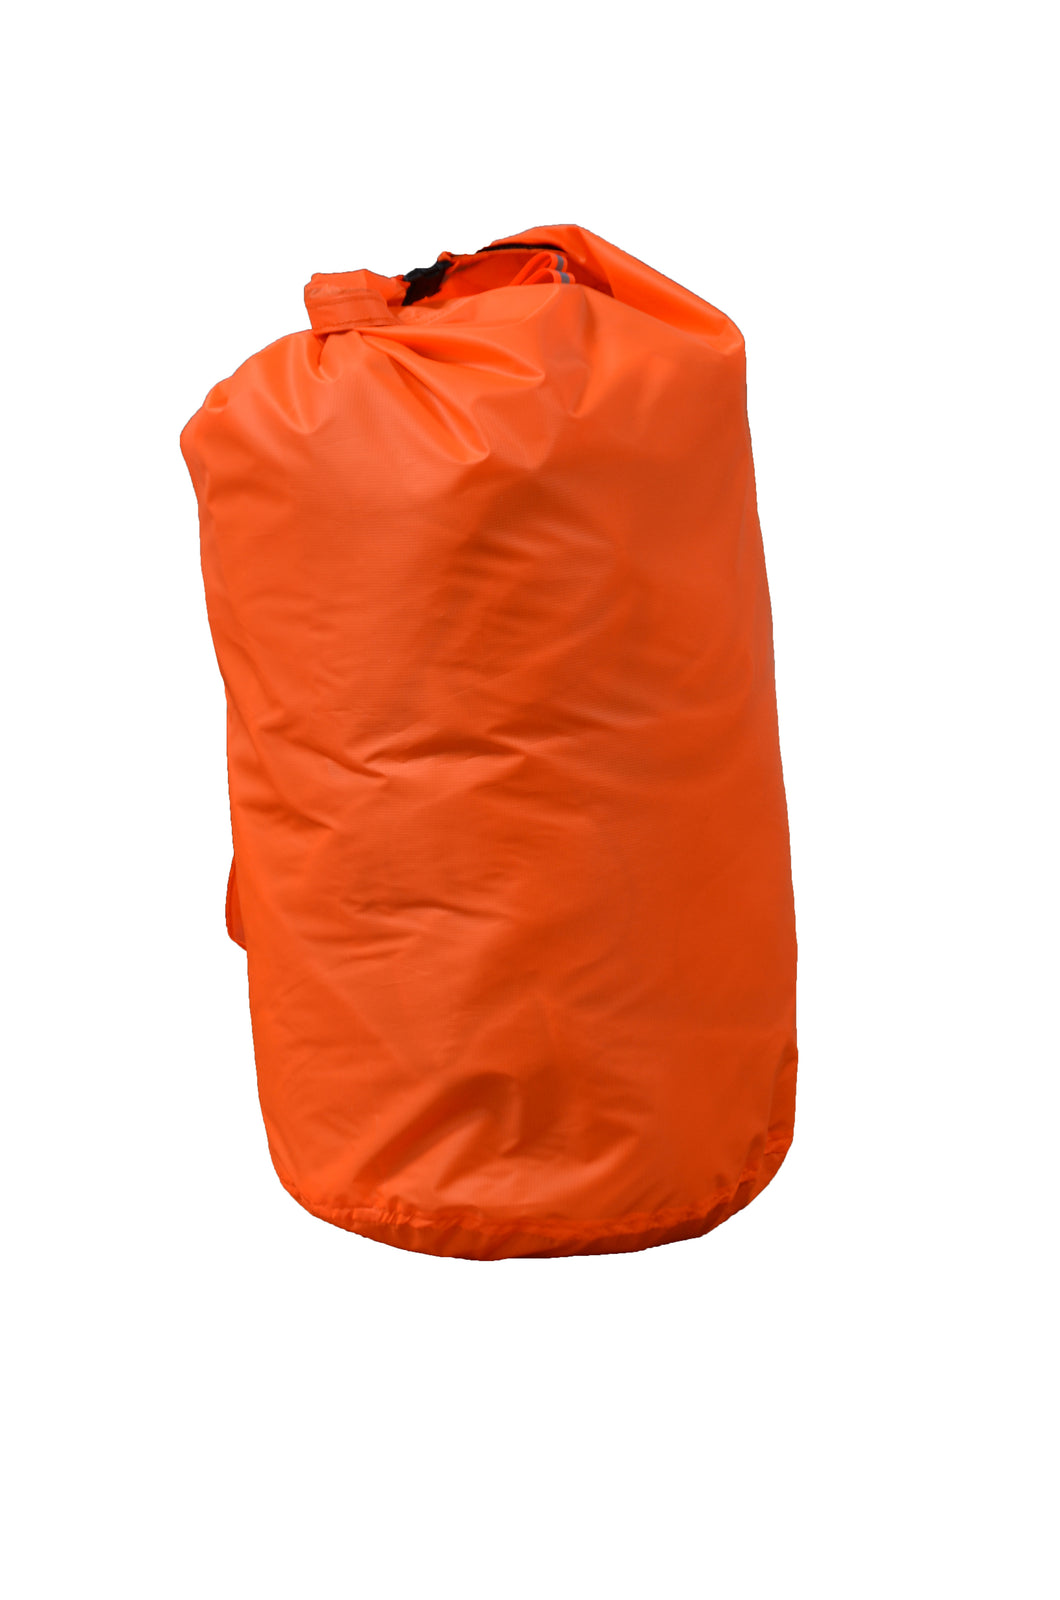 Transparent Plastic Packing Bag, For Packaging at Rs 165/kg in Guwahati